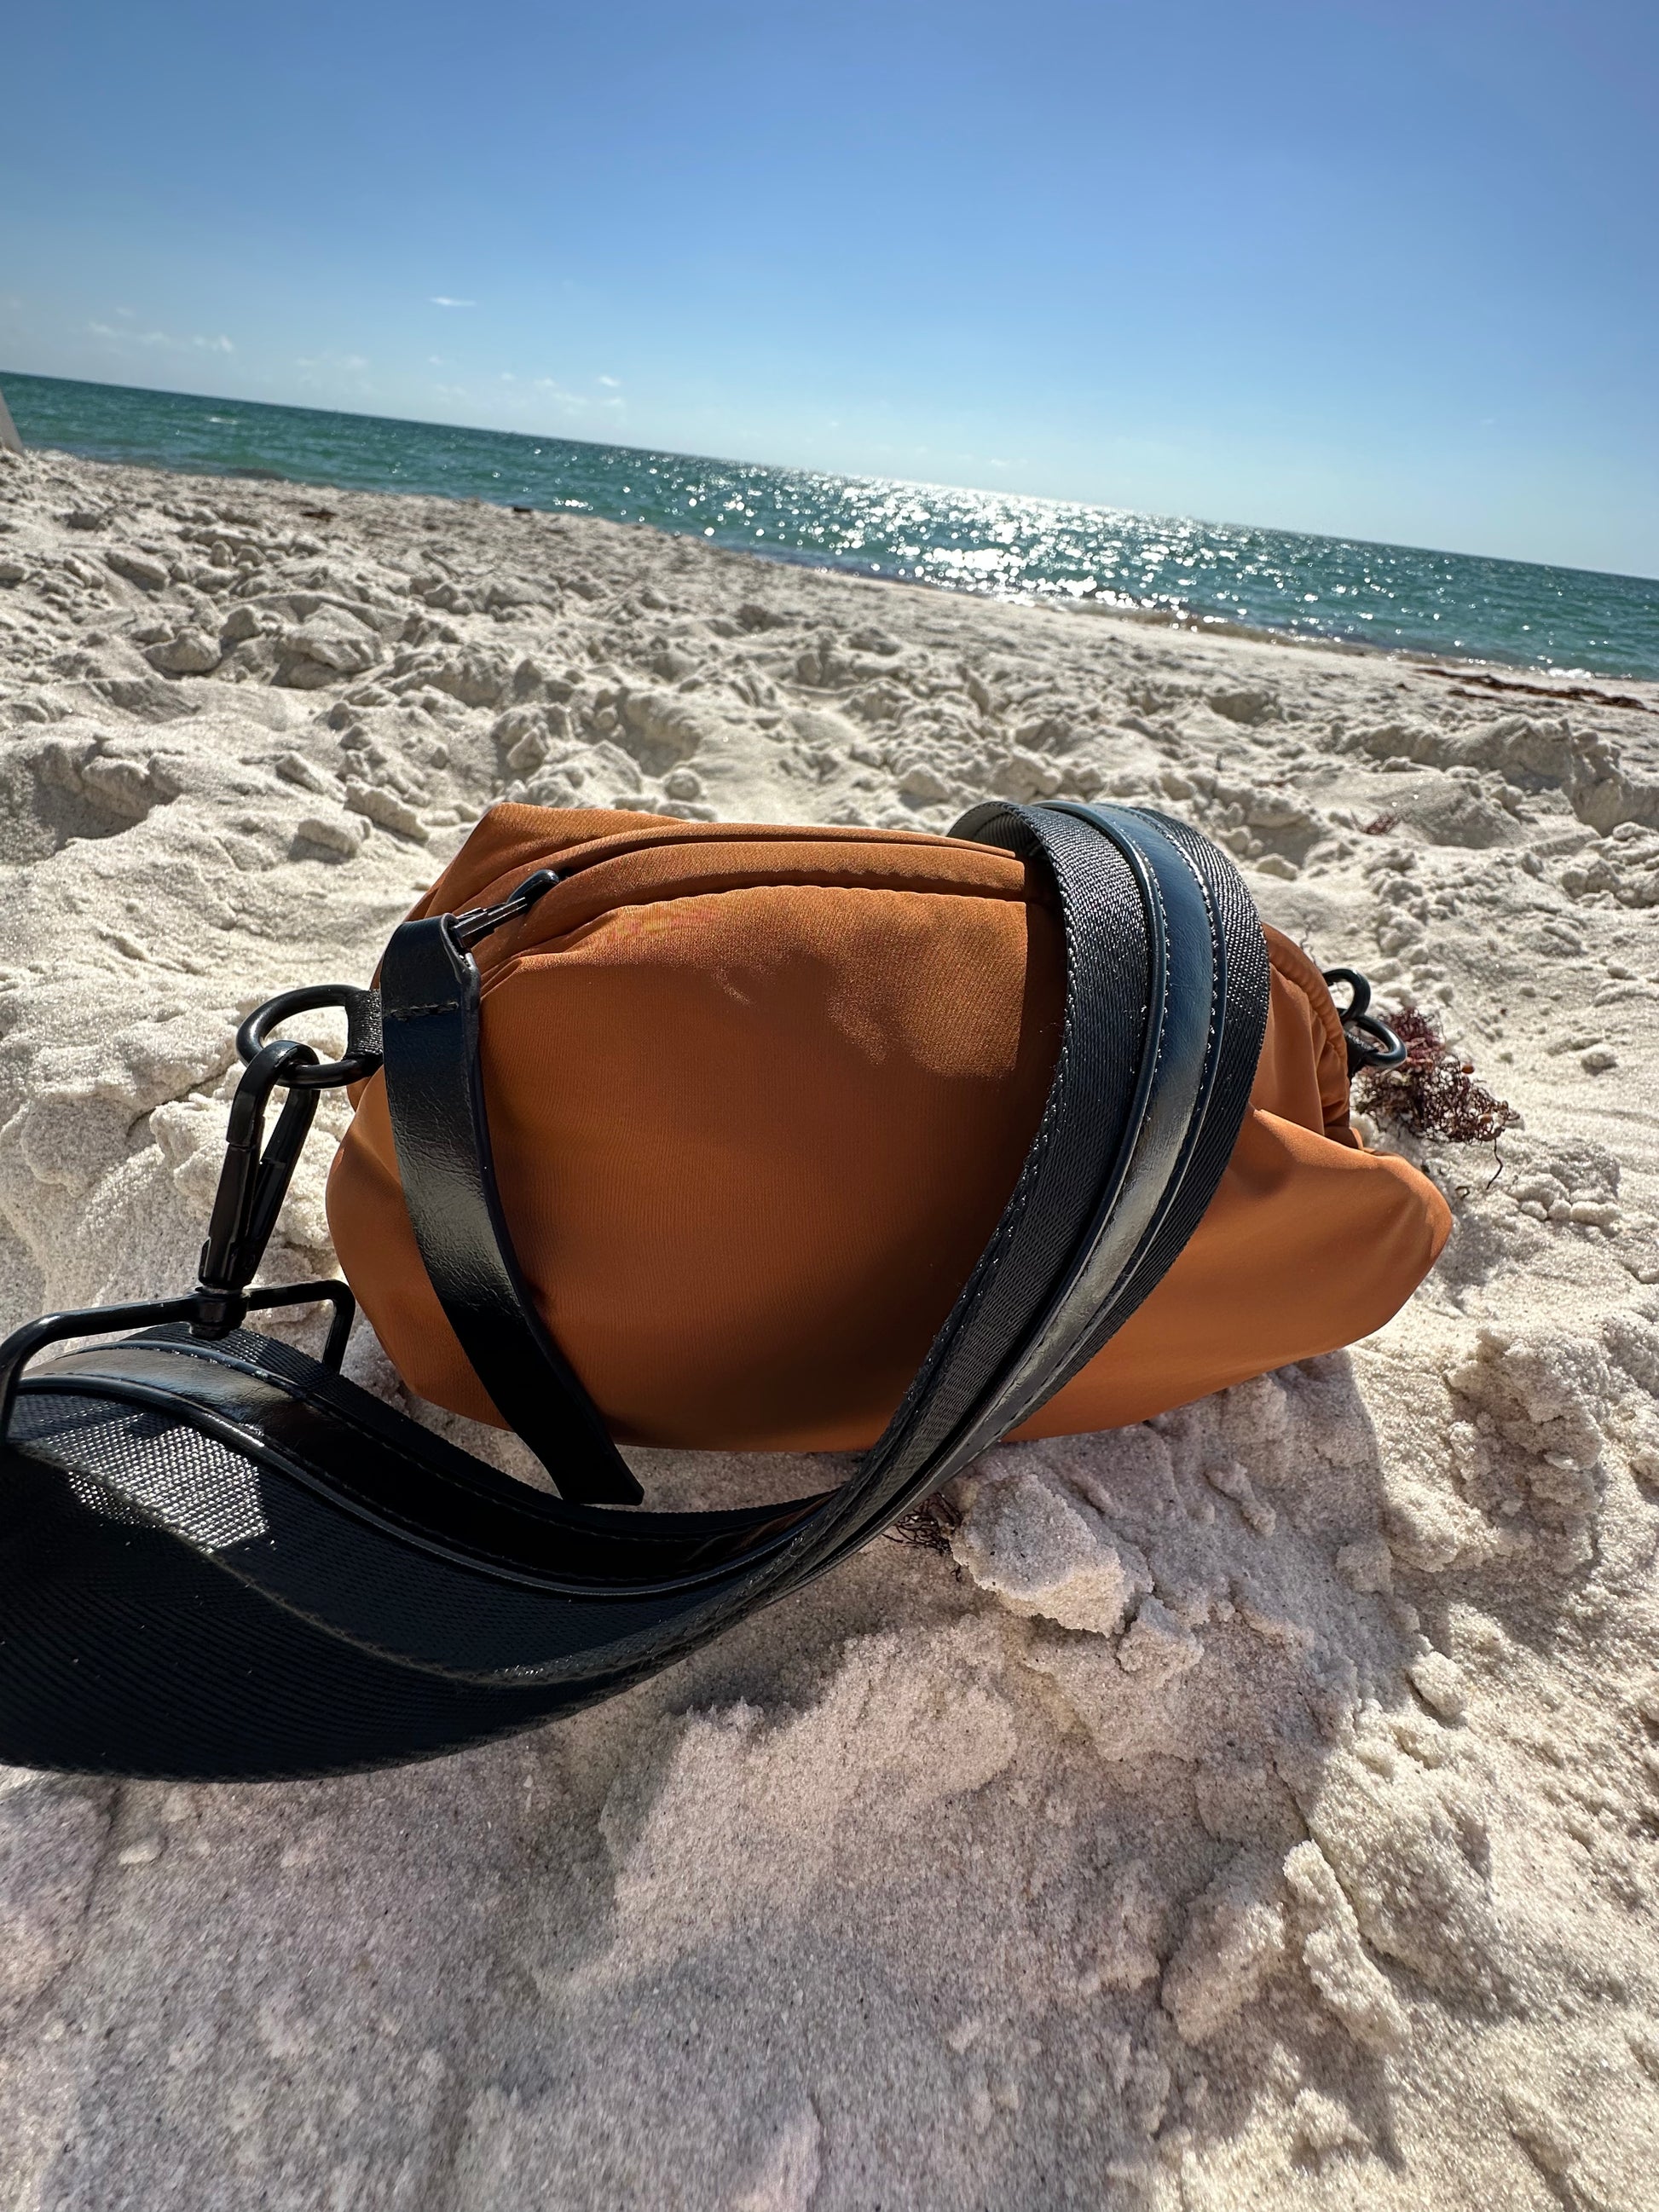 Brown nylon belt bag with black crossbody strap and shiny black leather detail on the beach